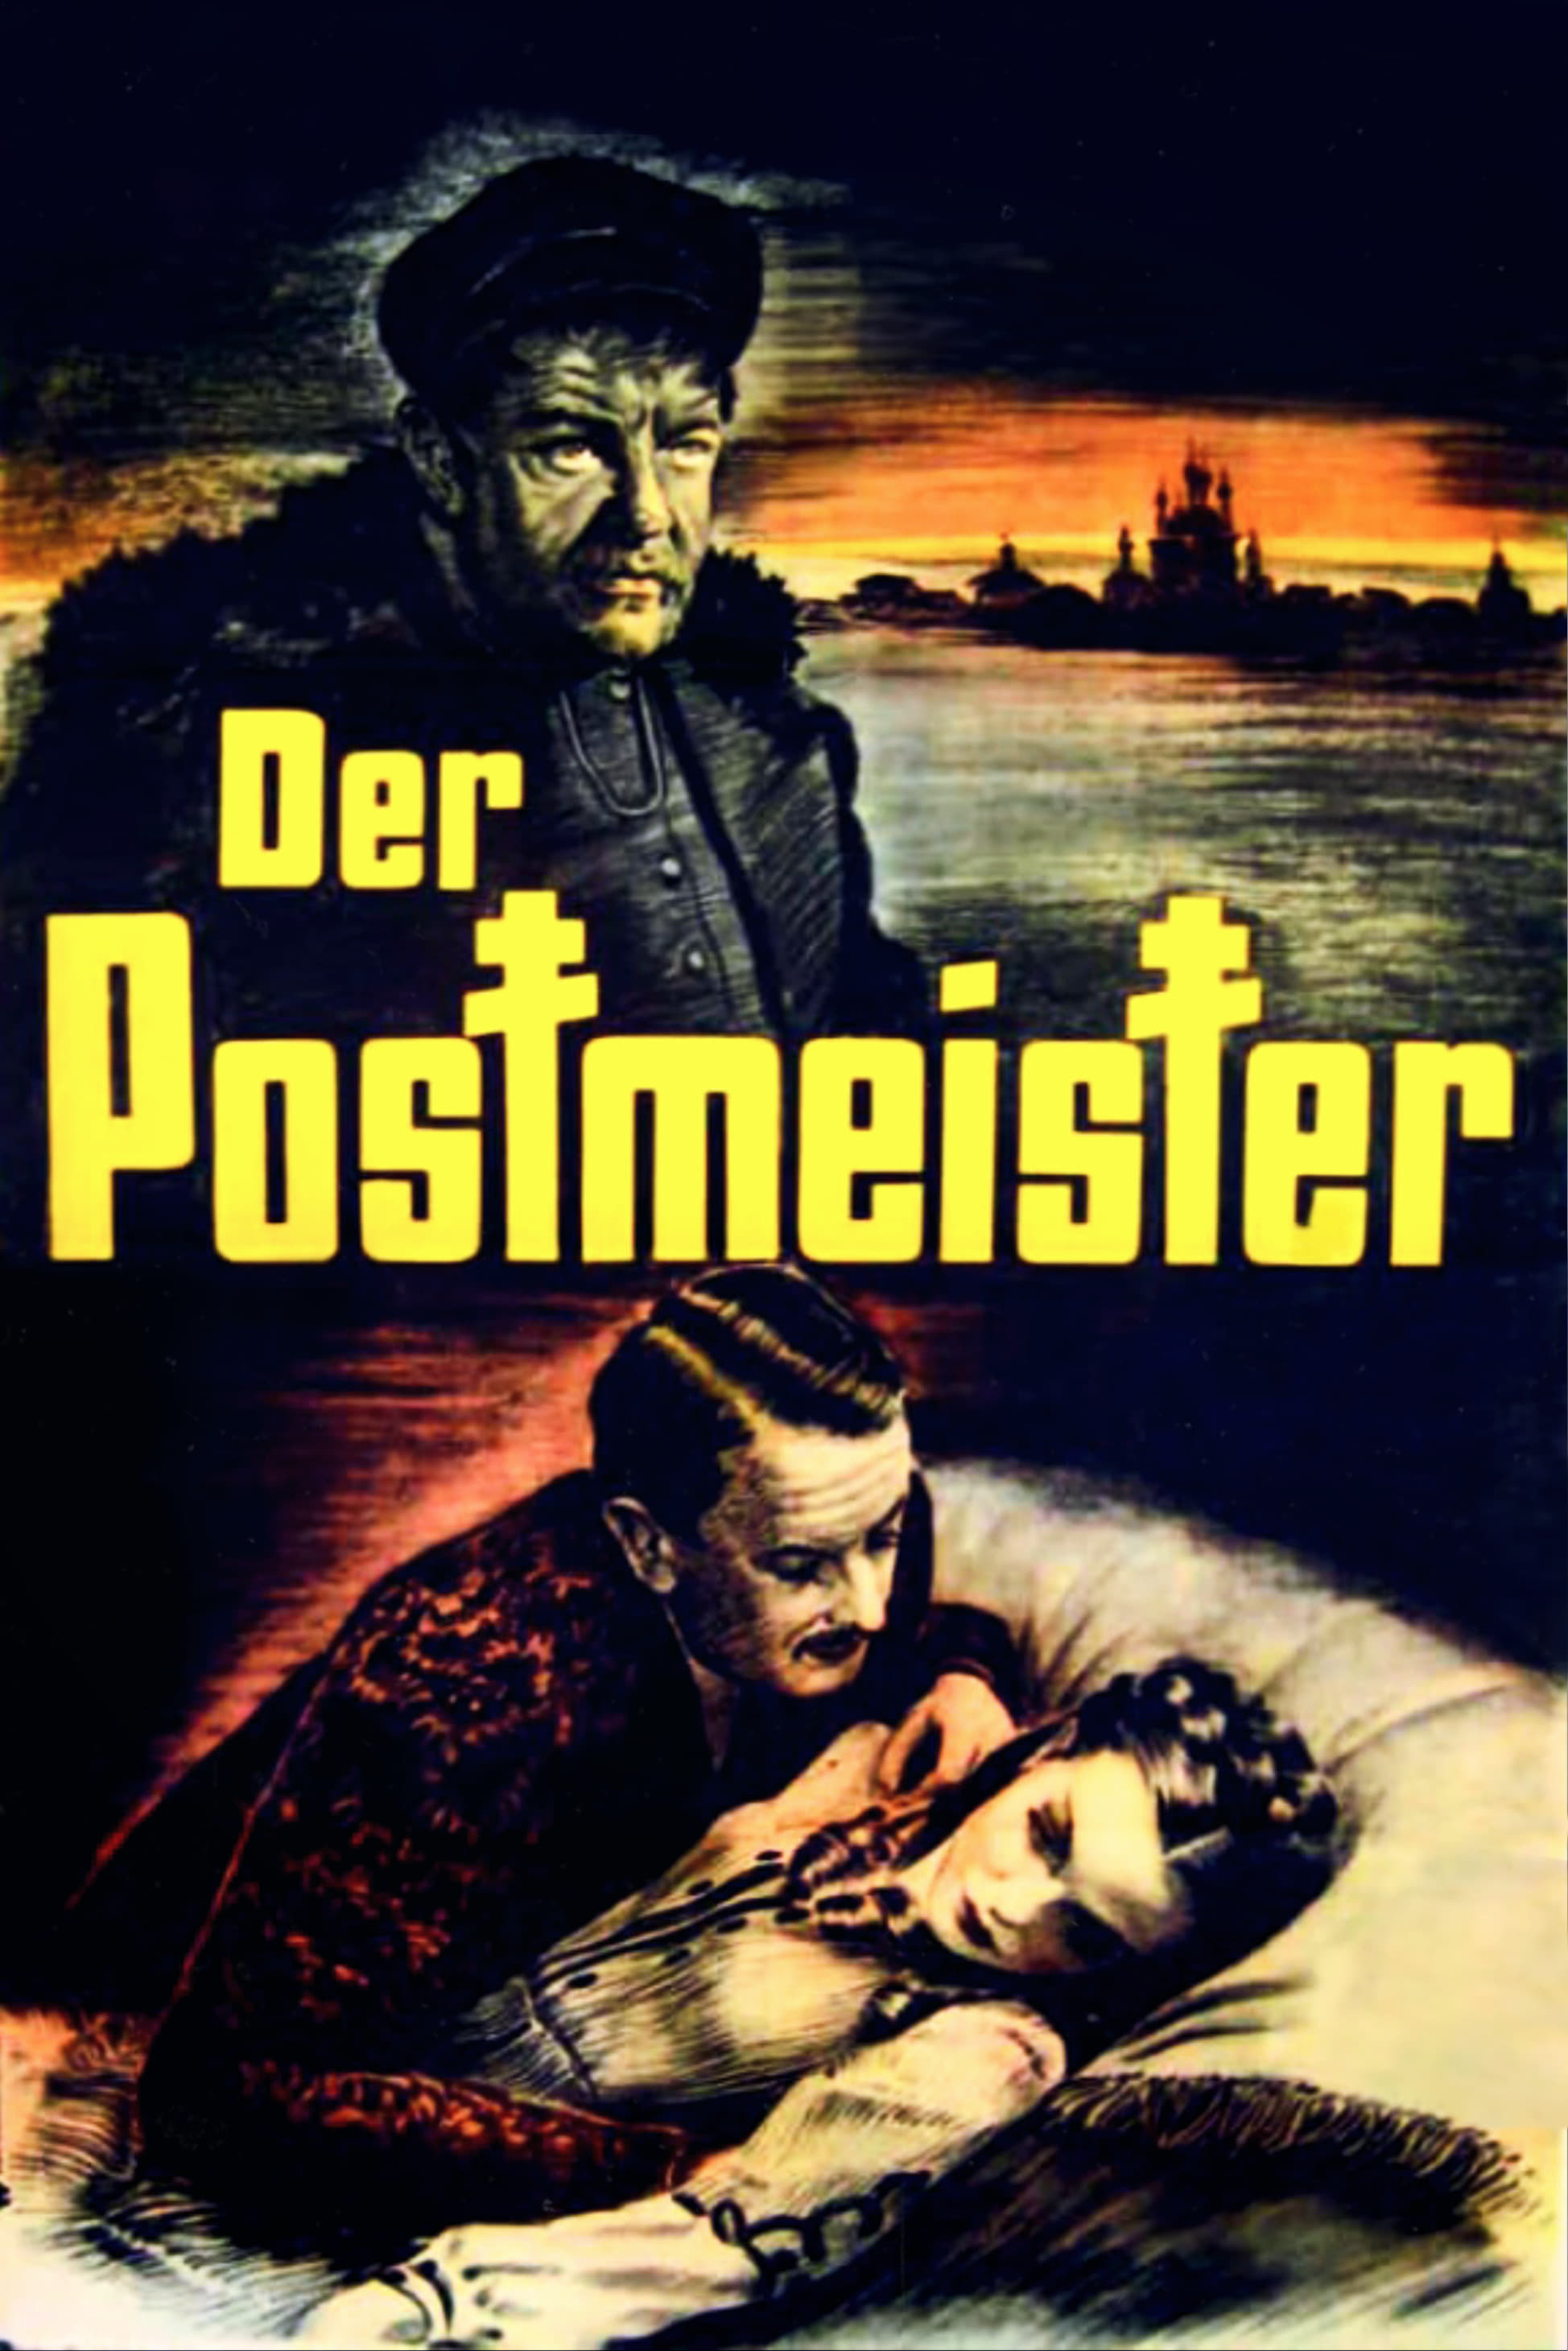 The Postmaster (1940)